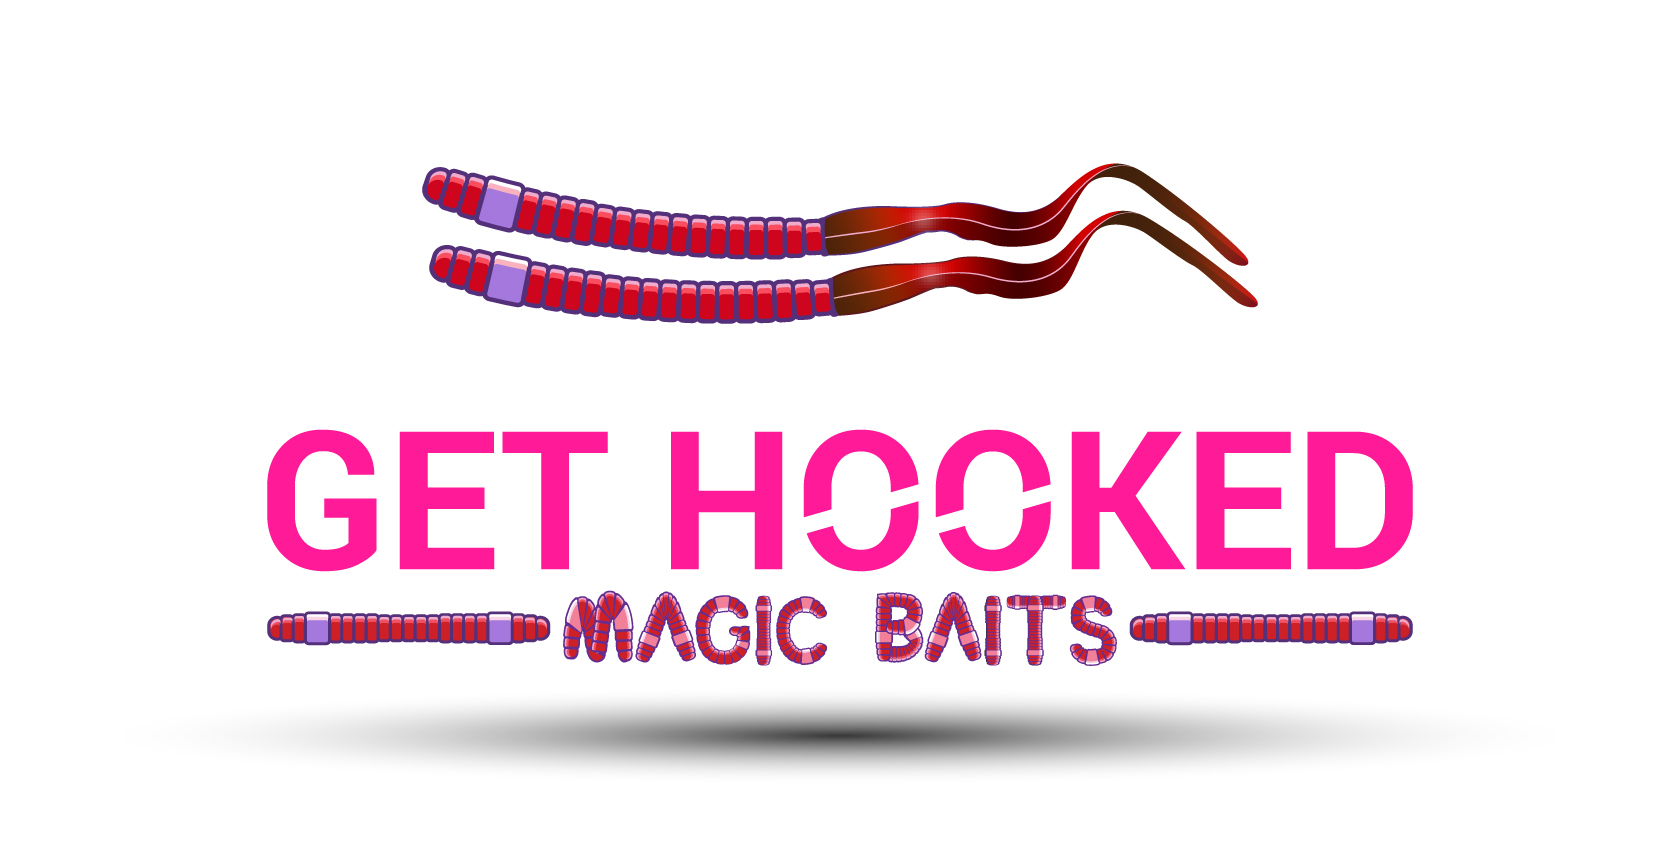 Jerk bait jointed bait soft plastic 5 1/4 inch Limited Edition color we  call spawner - Get Hooked Magic Baits